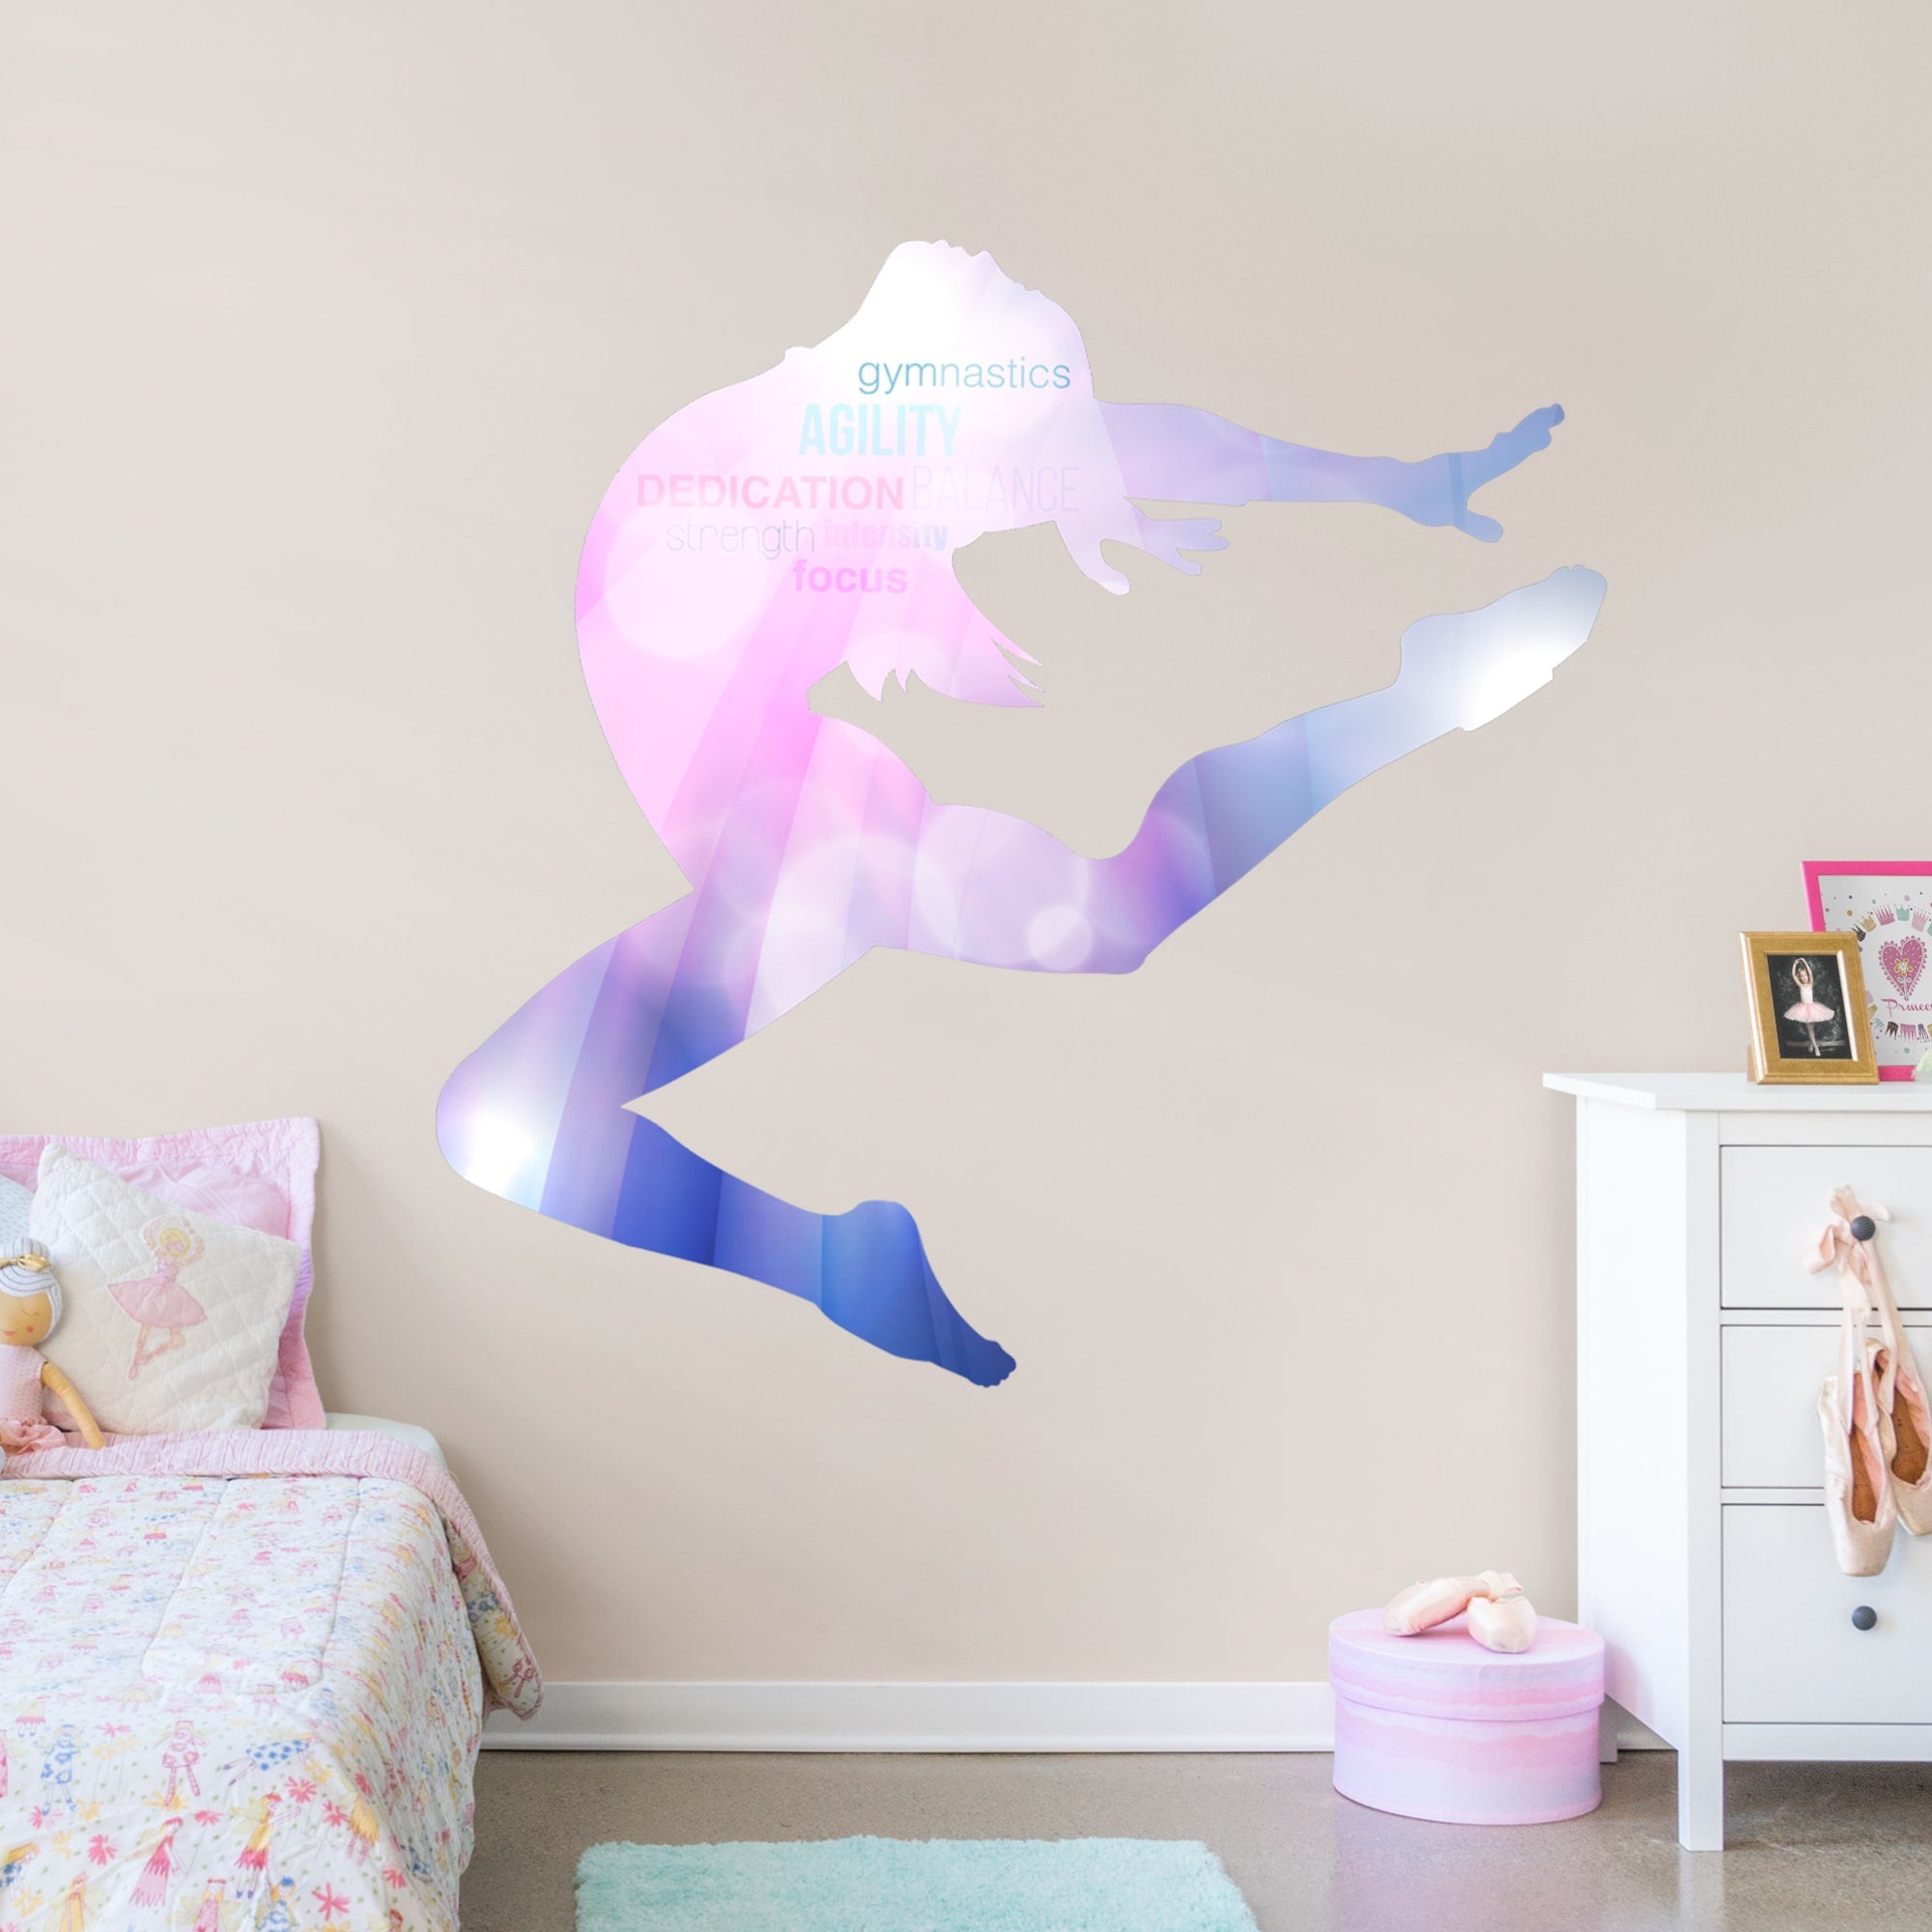 Gymnastics: Silhouette - Removable Vinyl Decal Life-Size Character + 2 Decals (66"W x 65"H) by Fathead